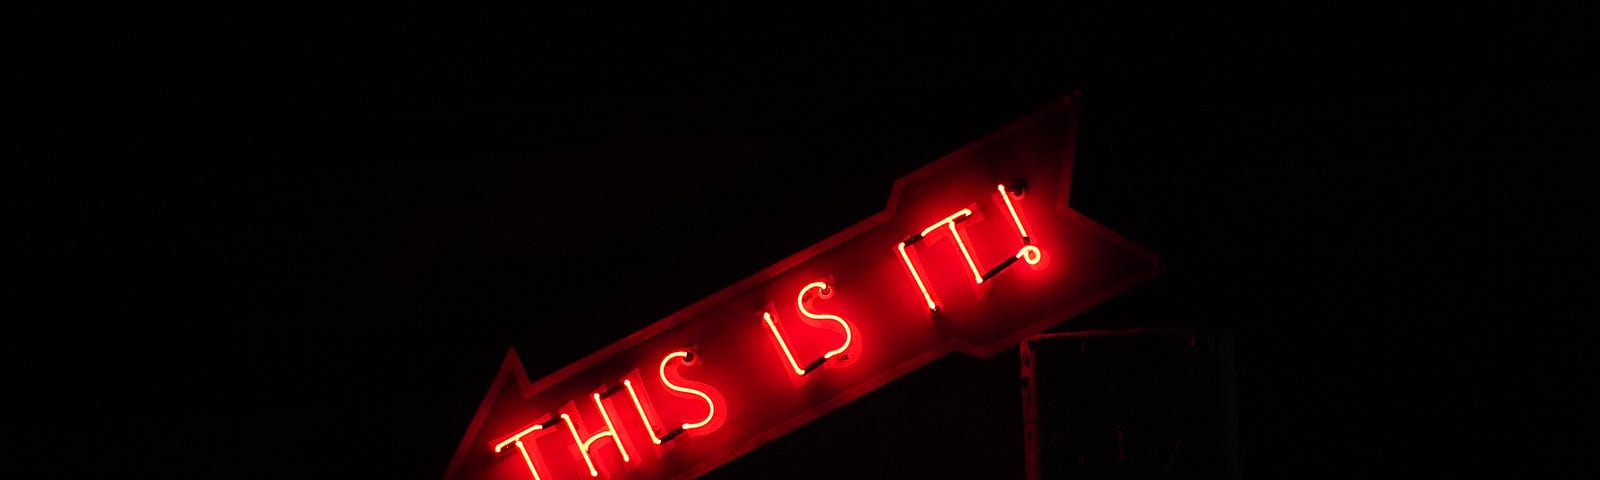 A red neon sign shaped like an arrow with the words, “This is it!” written in capital letters.